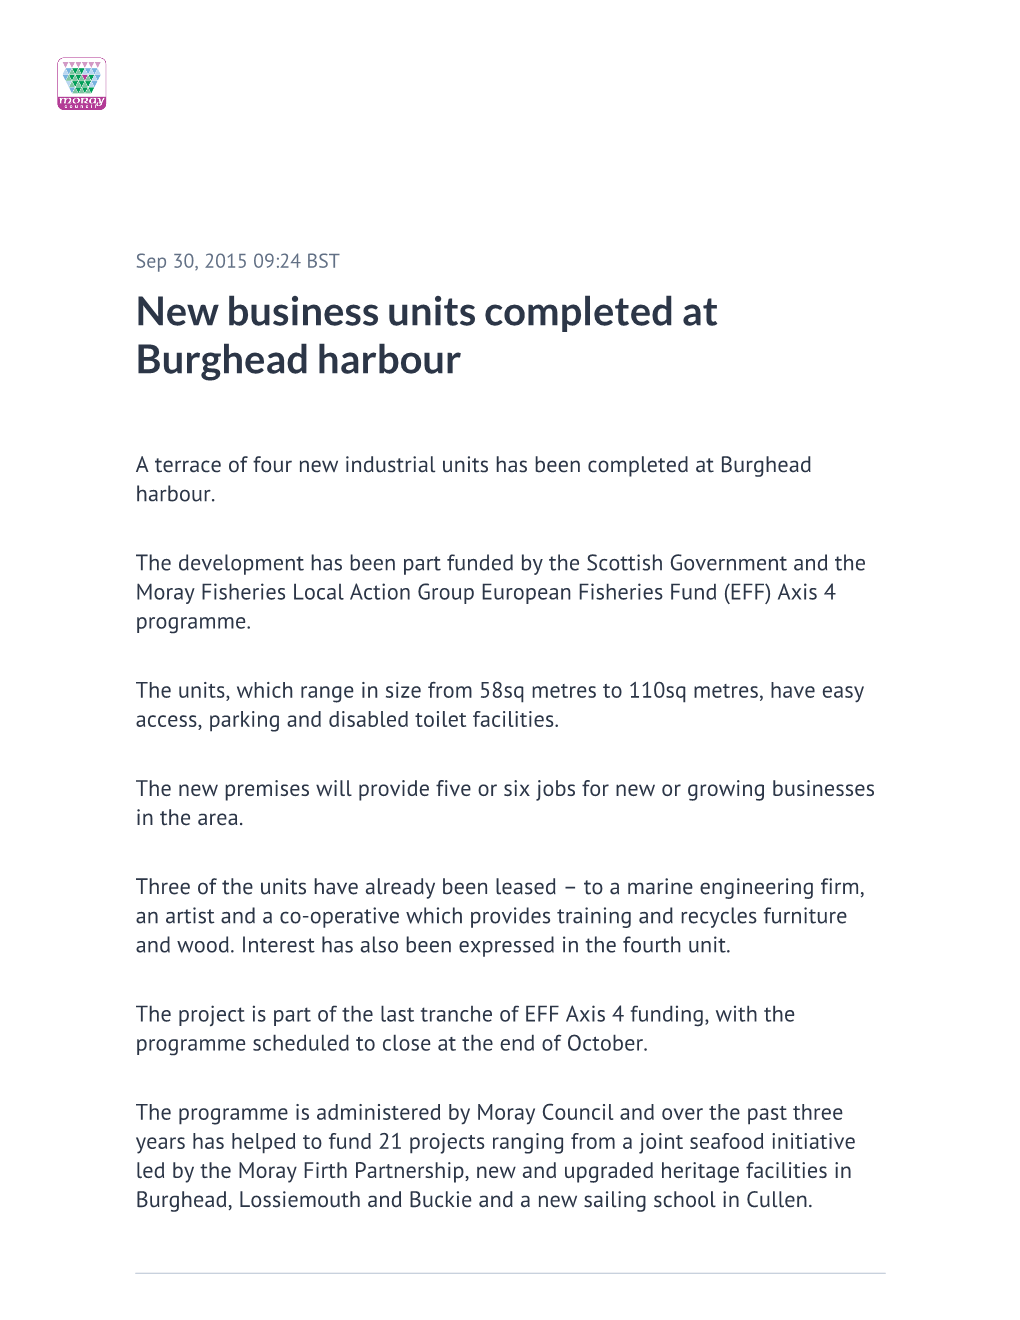 New Business Units Completed at Burghead Harbour